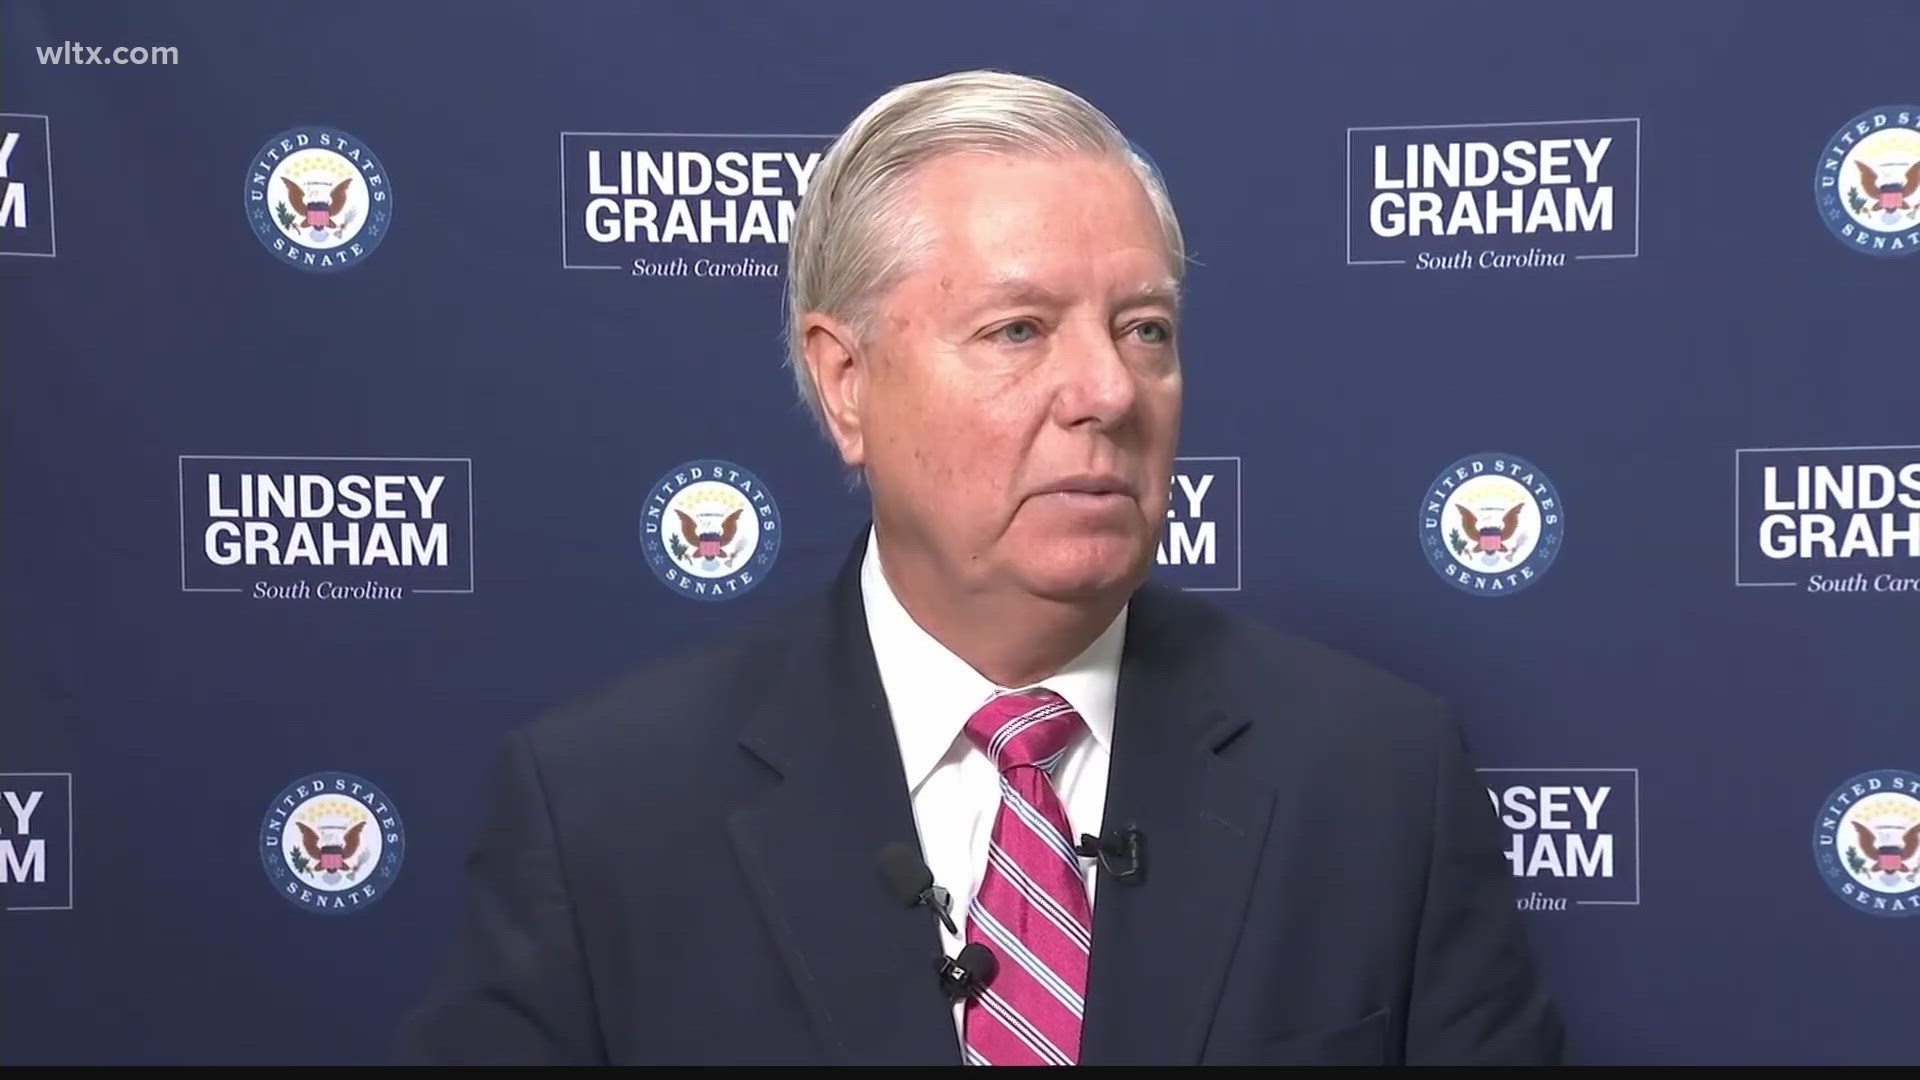 Russia's Interior Ministry on Monday issued an arrest warrant for U.S. Sen. Lindsey Graham following his comments related to the fighting in Ukraine.